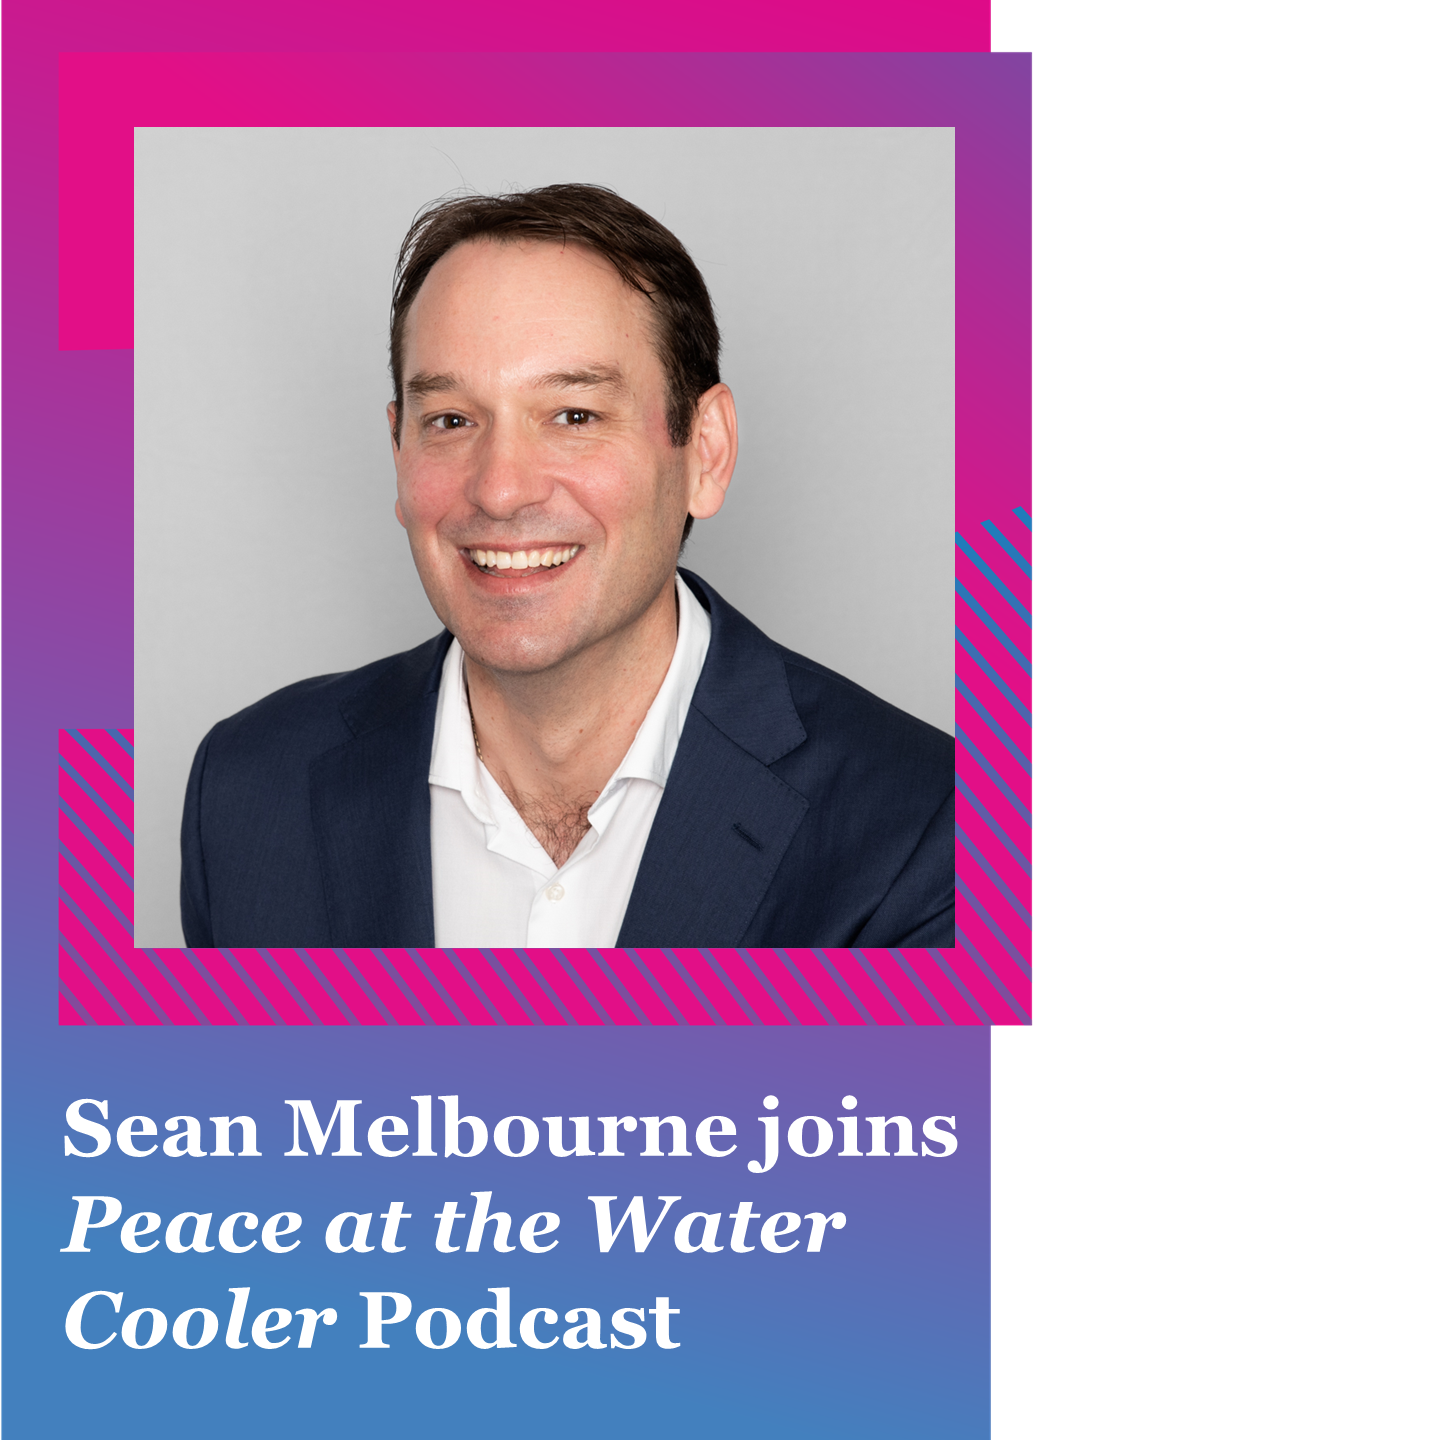 Sean Melbourne Peace at the Water Cooler podcast - Square